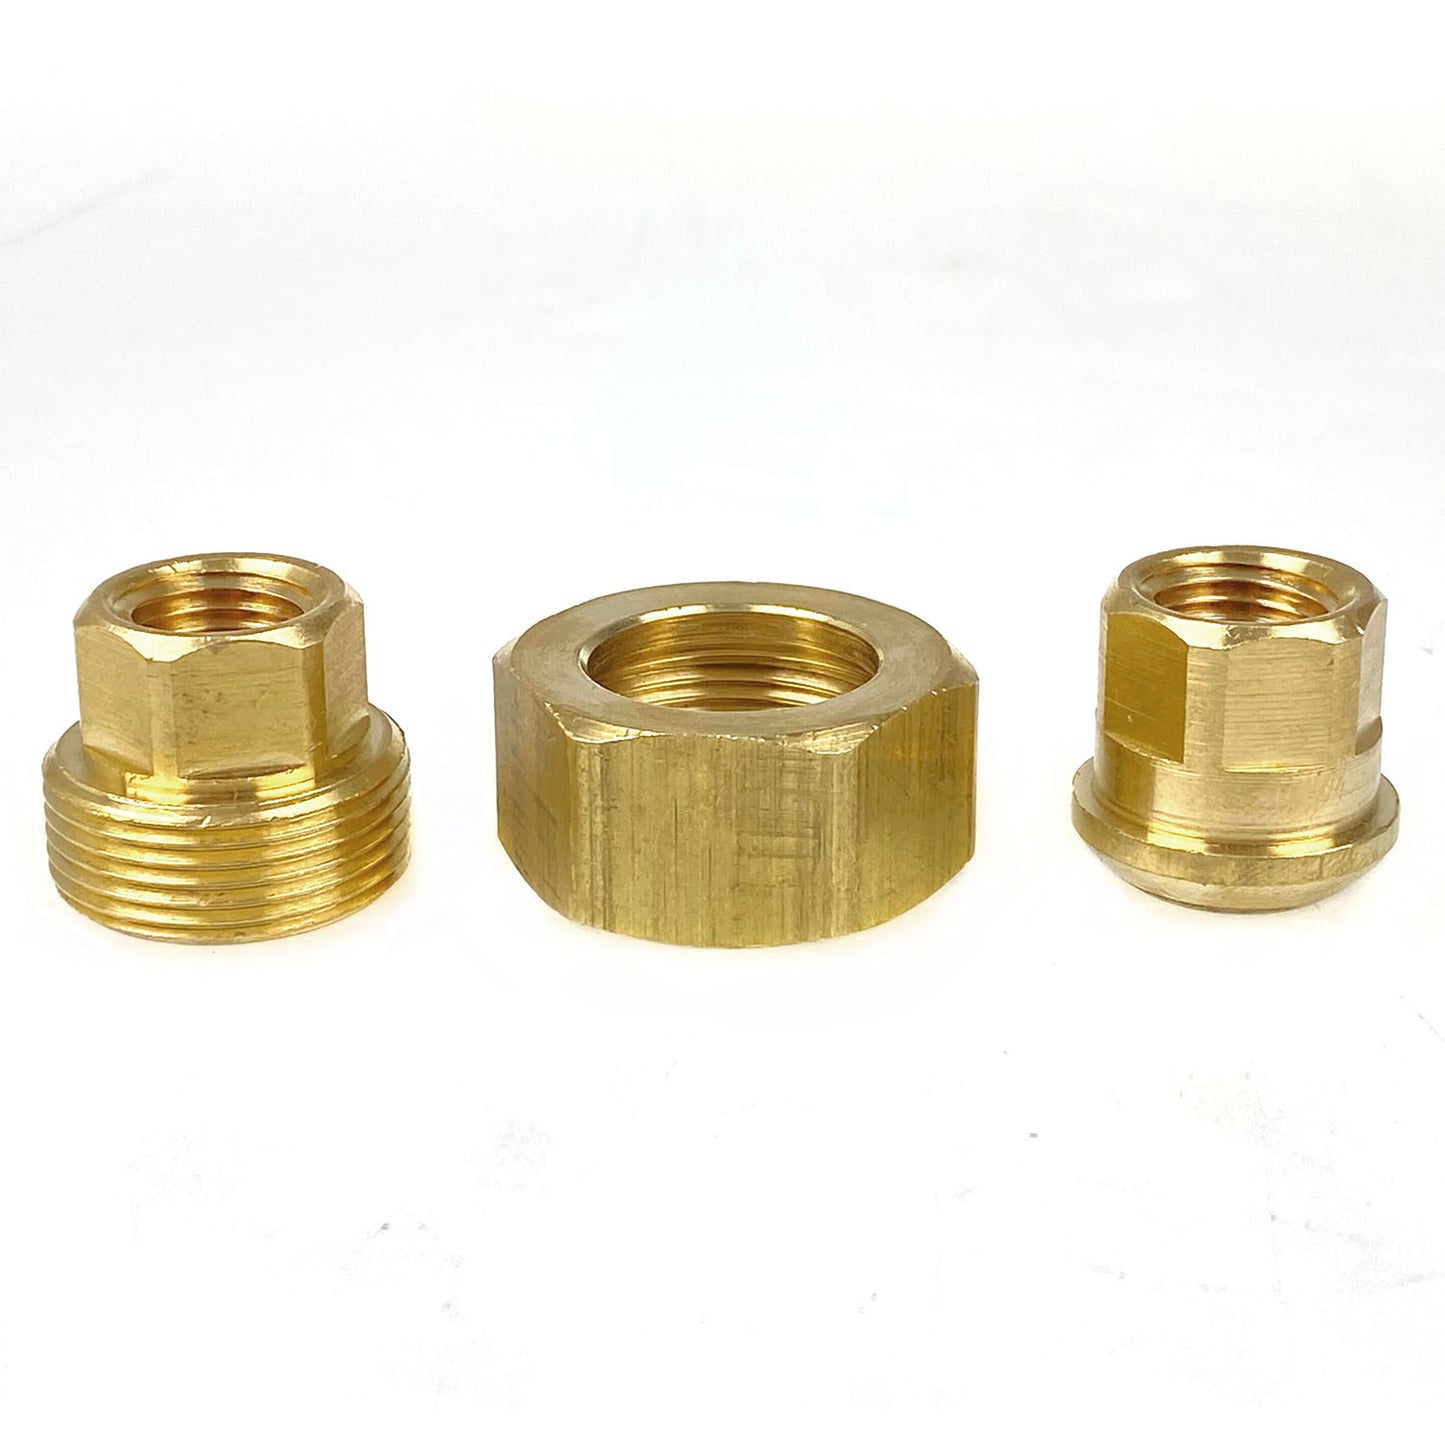 1/4" NPT Female Solid Brass Three Piece Pipe Union Fitting Adapter